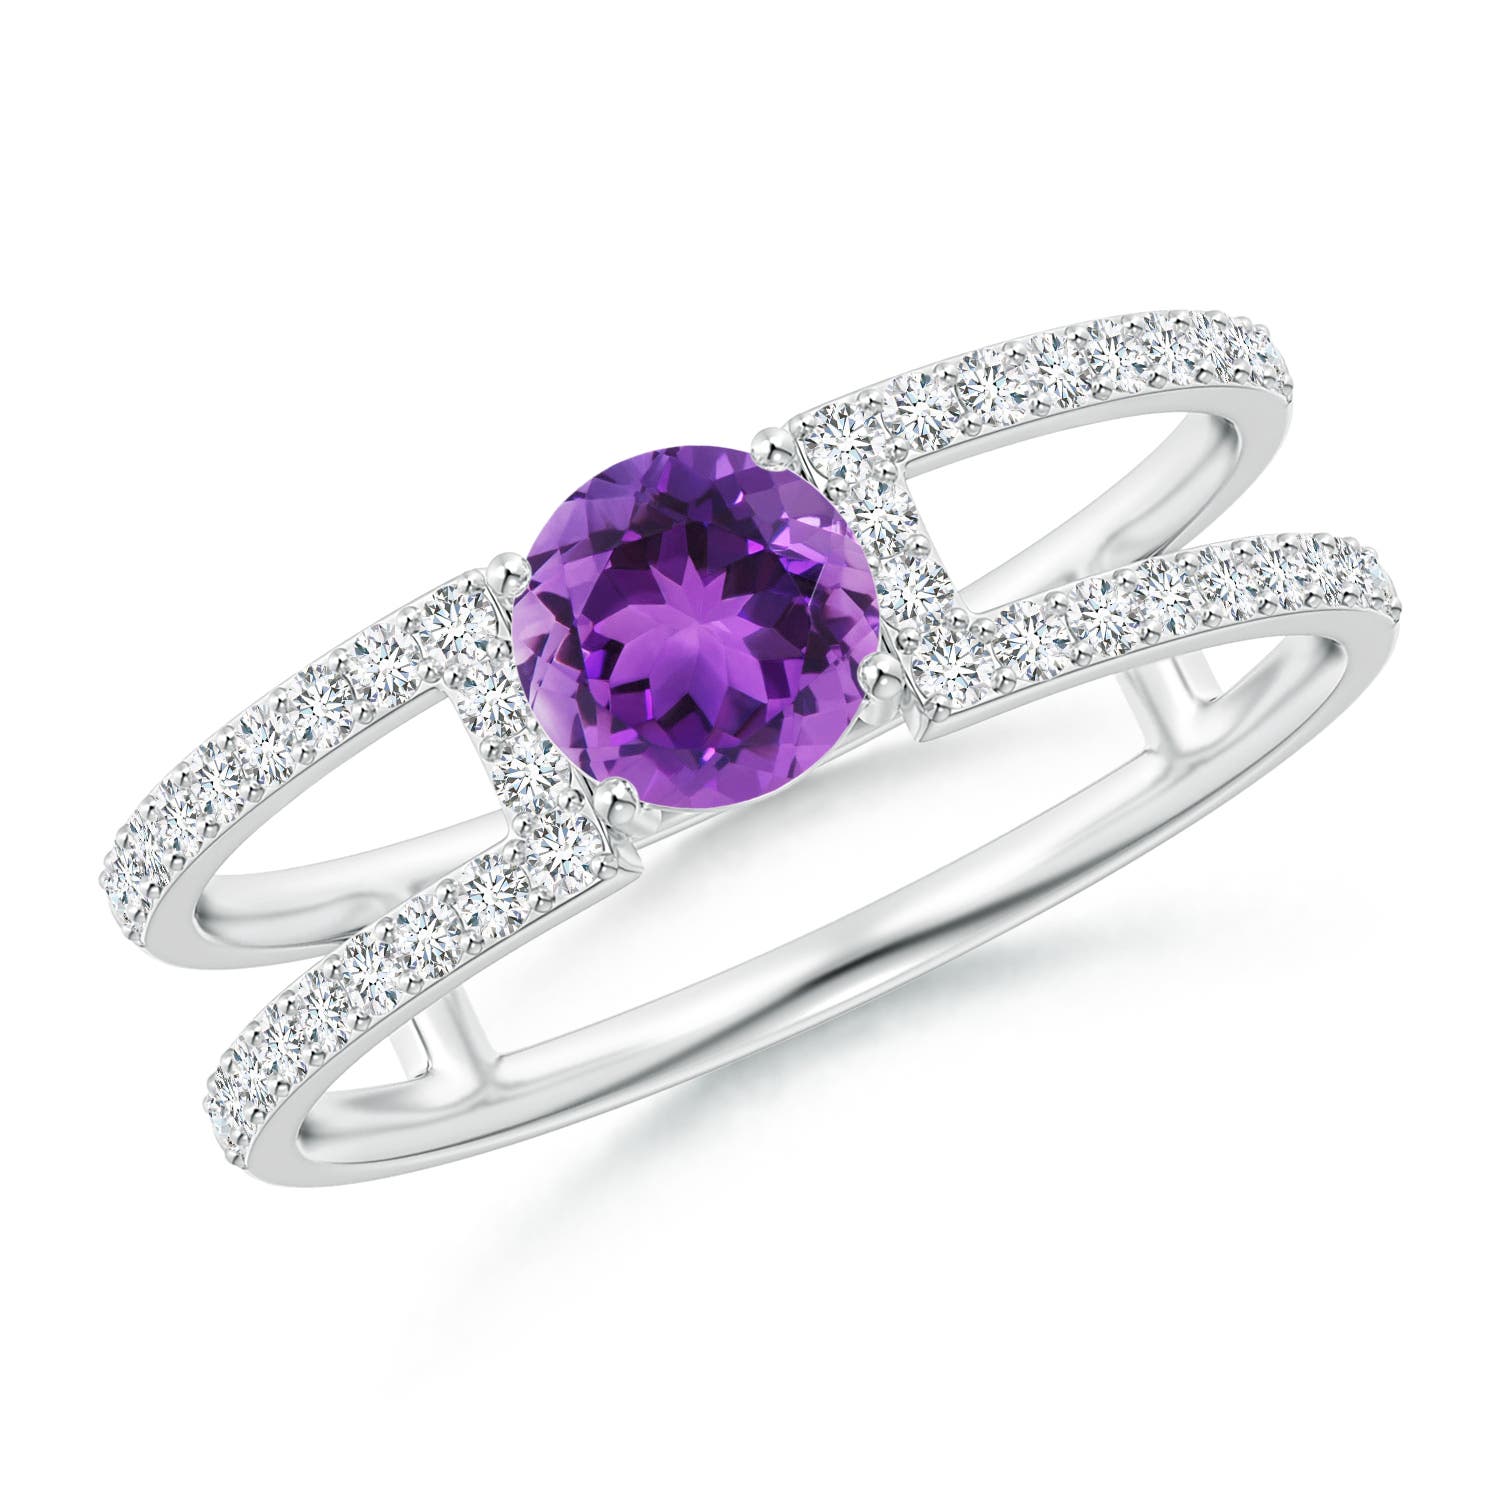 AAA - Amethyst / 0.77 CT / 14 KT White Gold